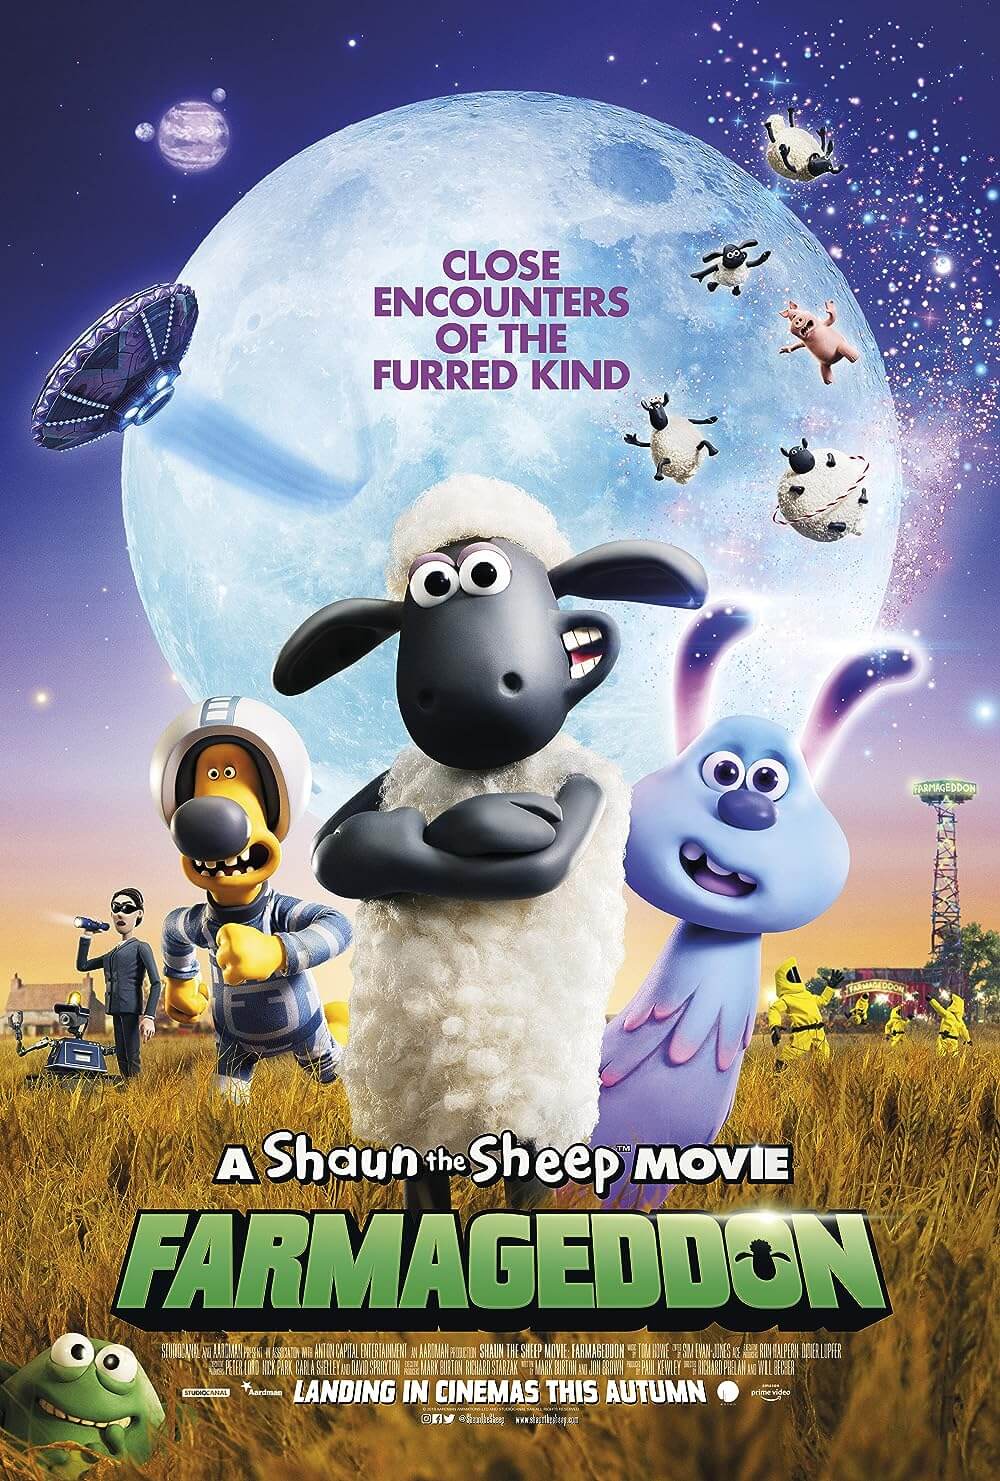 A Shaun the Sheep Movie: Farmageddon is one of the best movies for 5 year olds on Netflix.